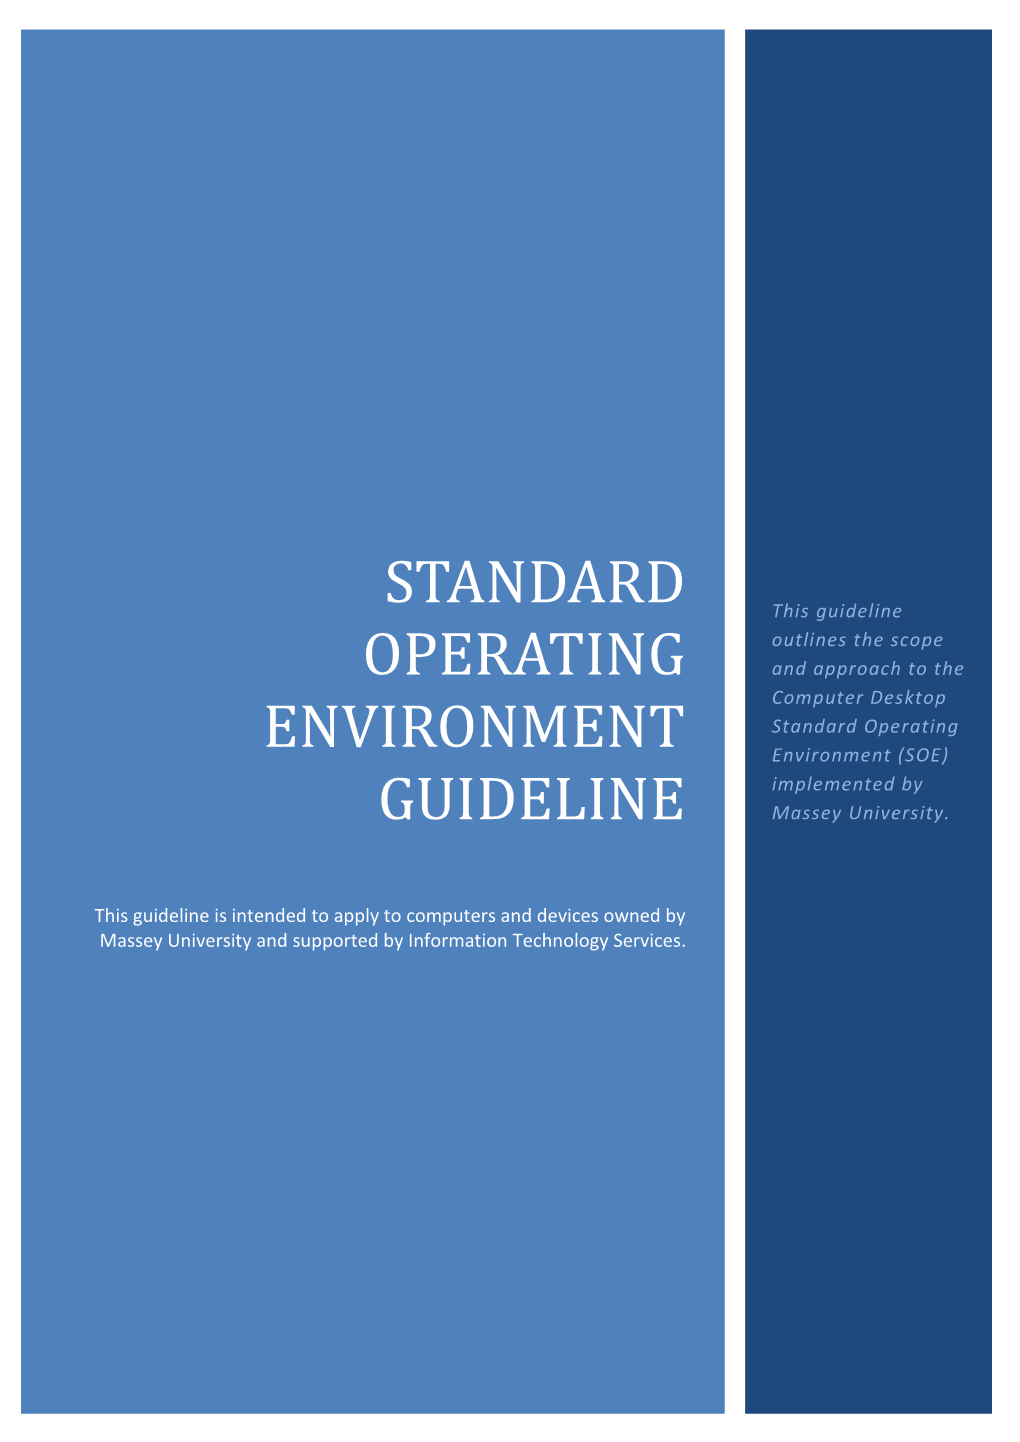 Standard Operating Environment Guideline